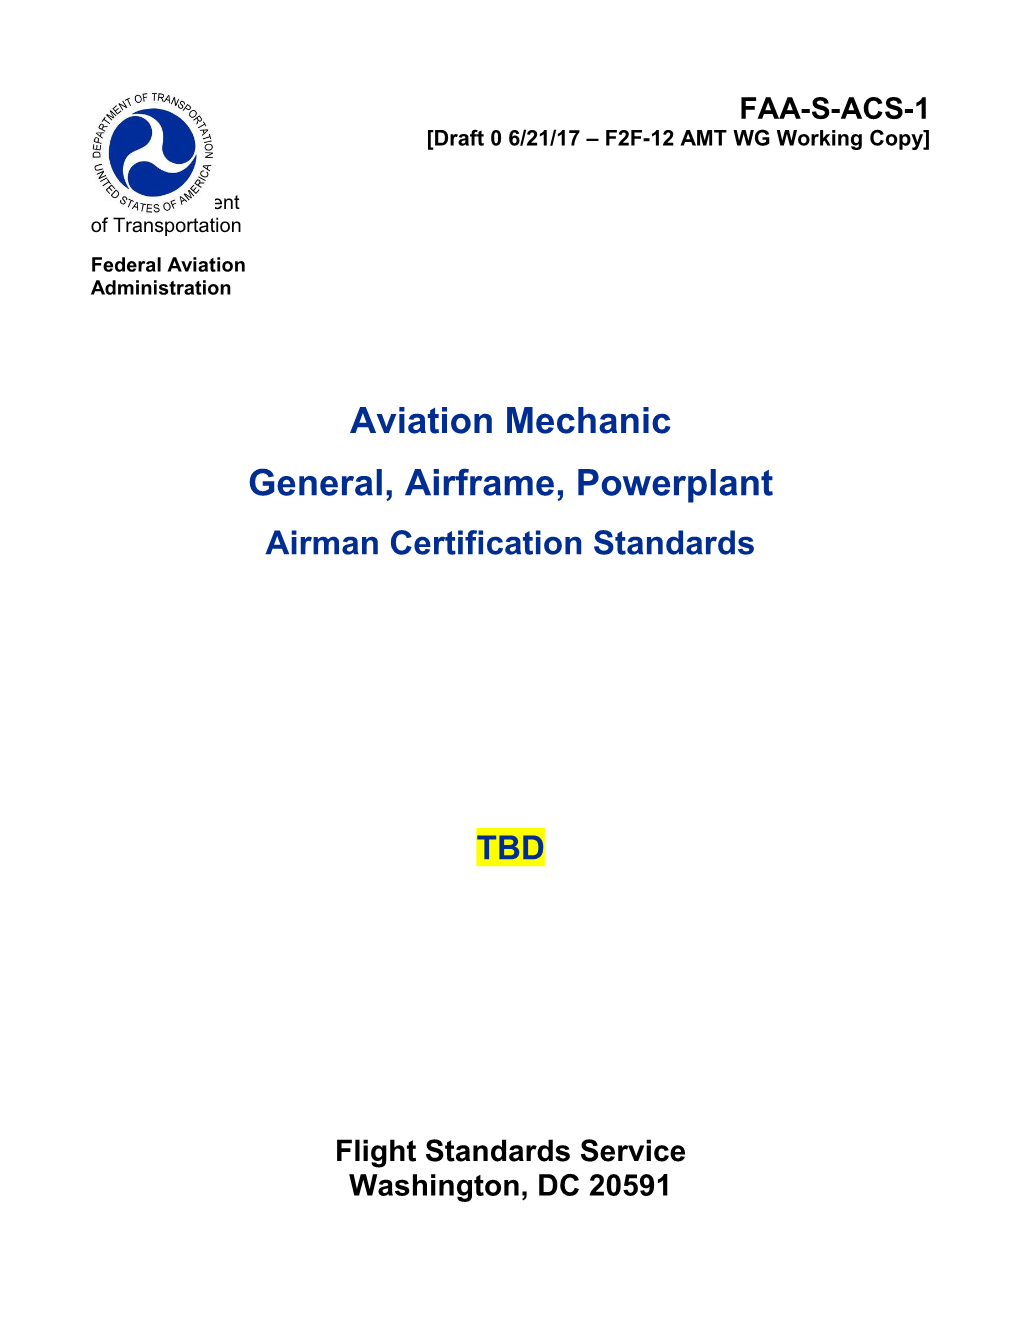 Private Pilot - Airplane Airman Certification Standards